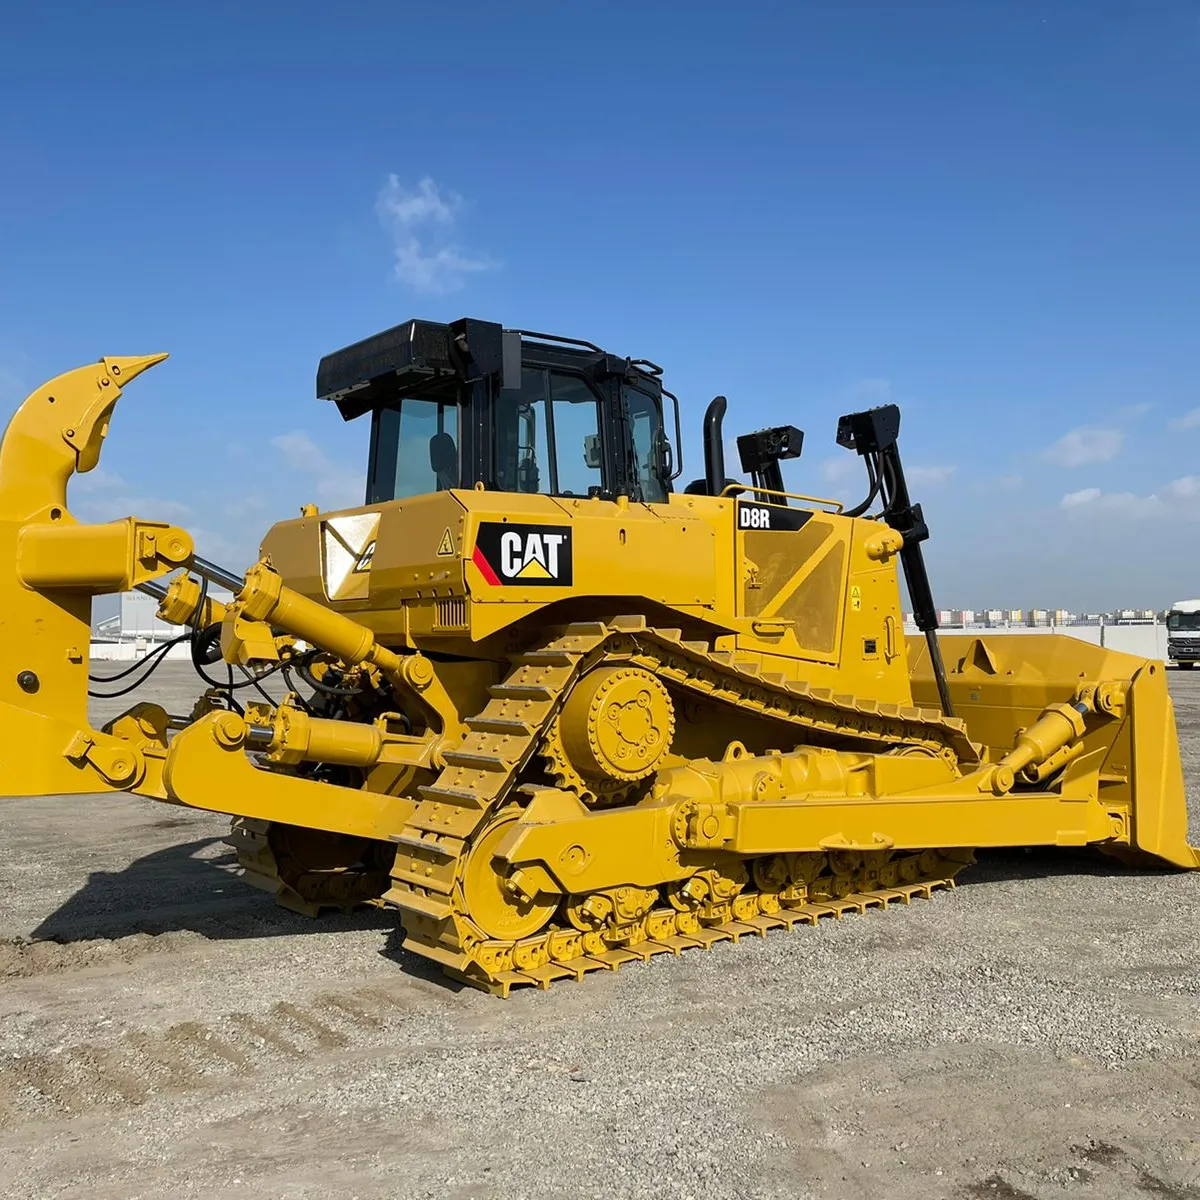 Used bulldozer D8R D6G D7G for sale Second hand dozer d7G in good condition